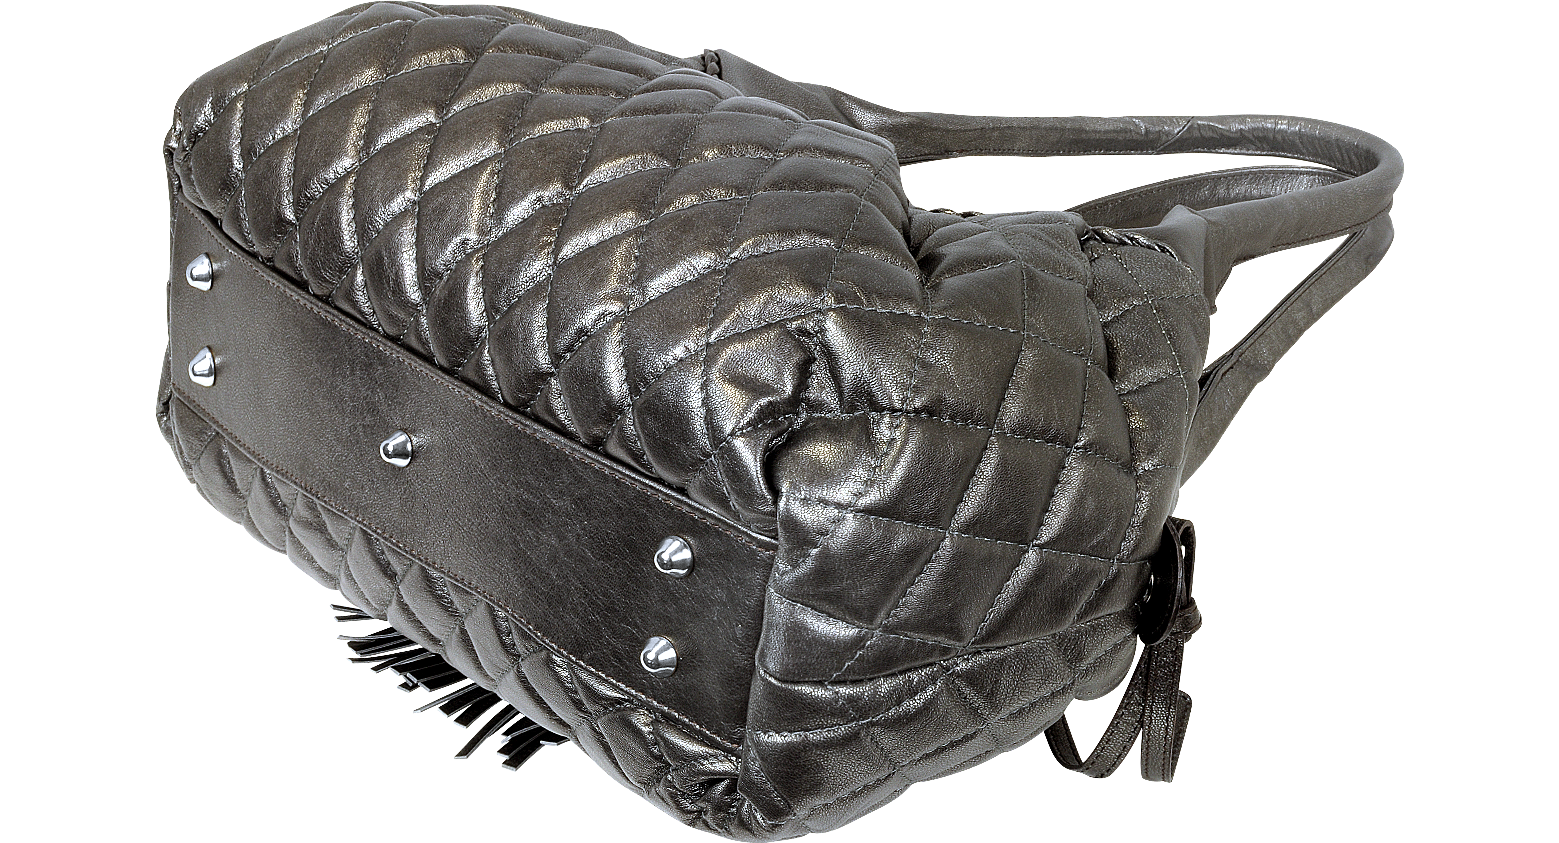 Fontanelli Quilted Leather Shoulder Bag at FORZIERI